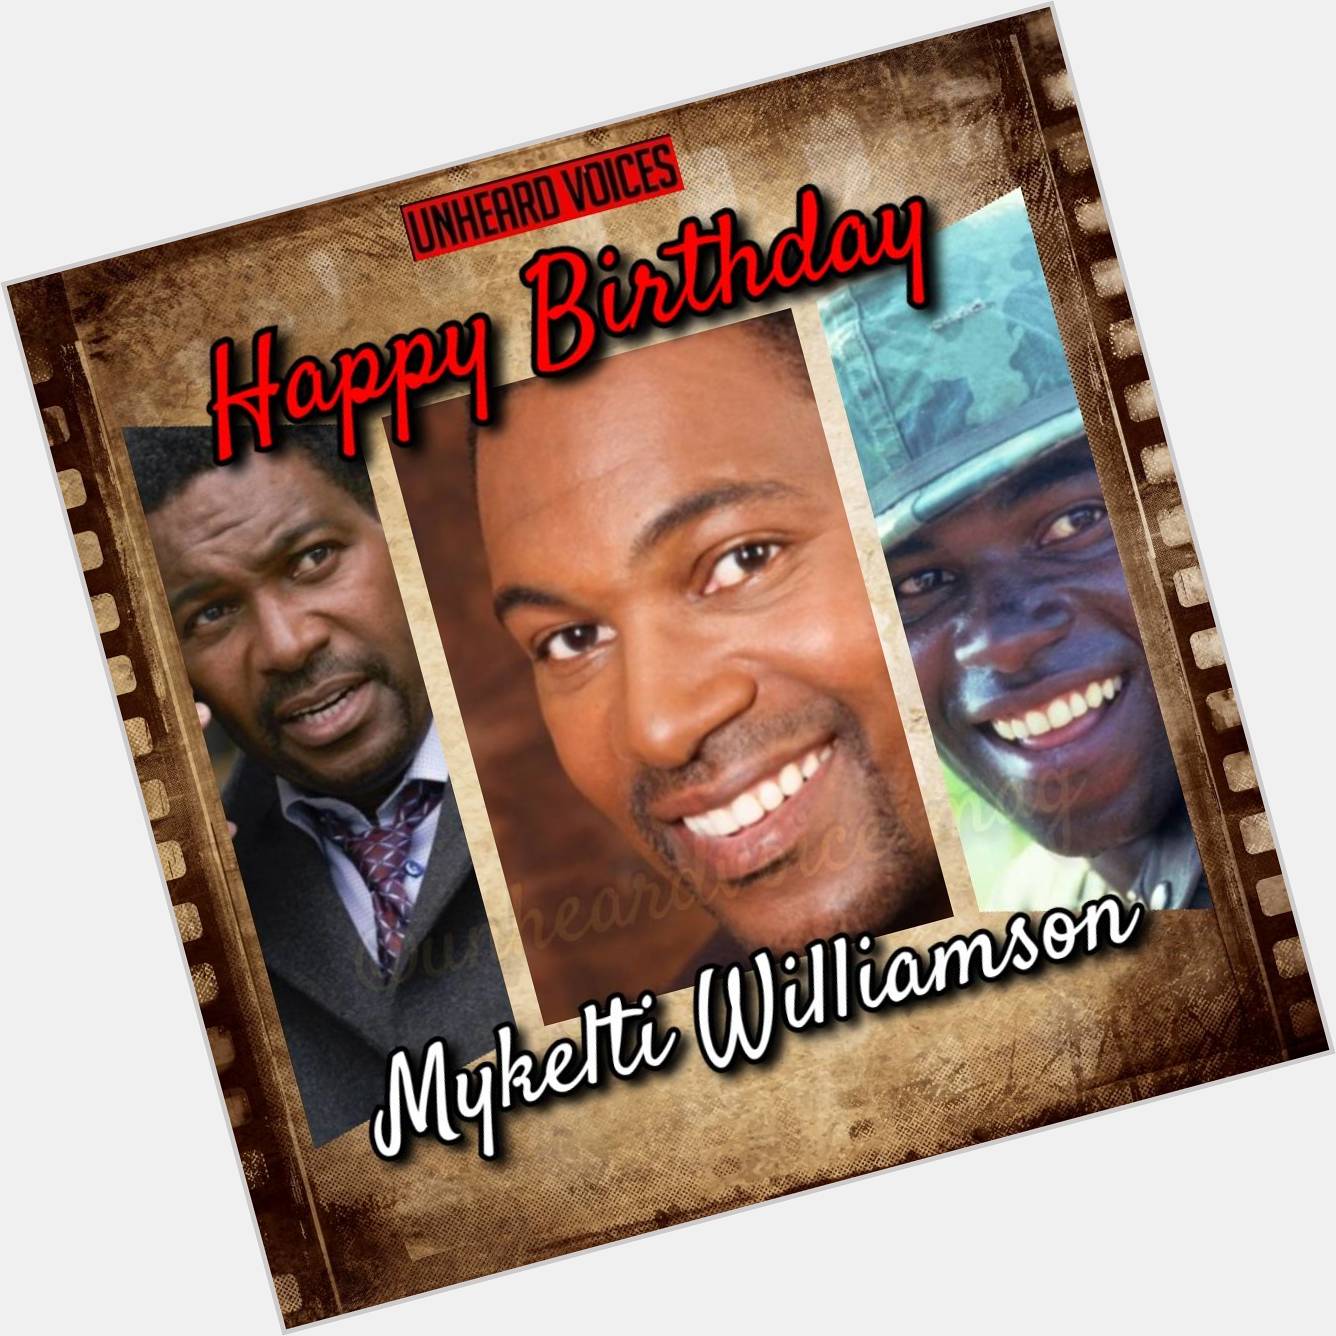 Happy Birthday Mykelti Williamson.  The actor turns 64 today, March 4.  